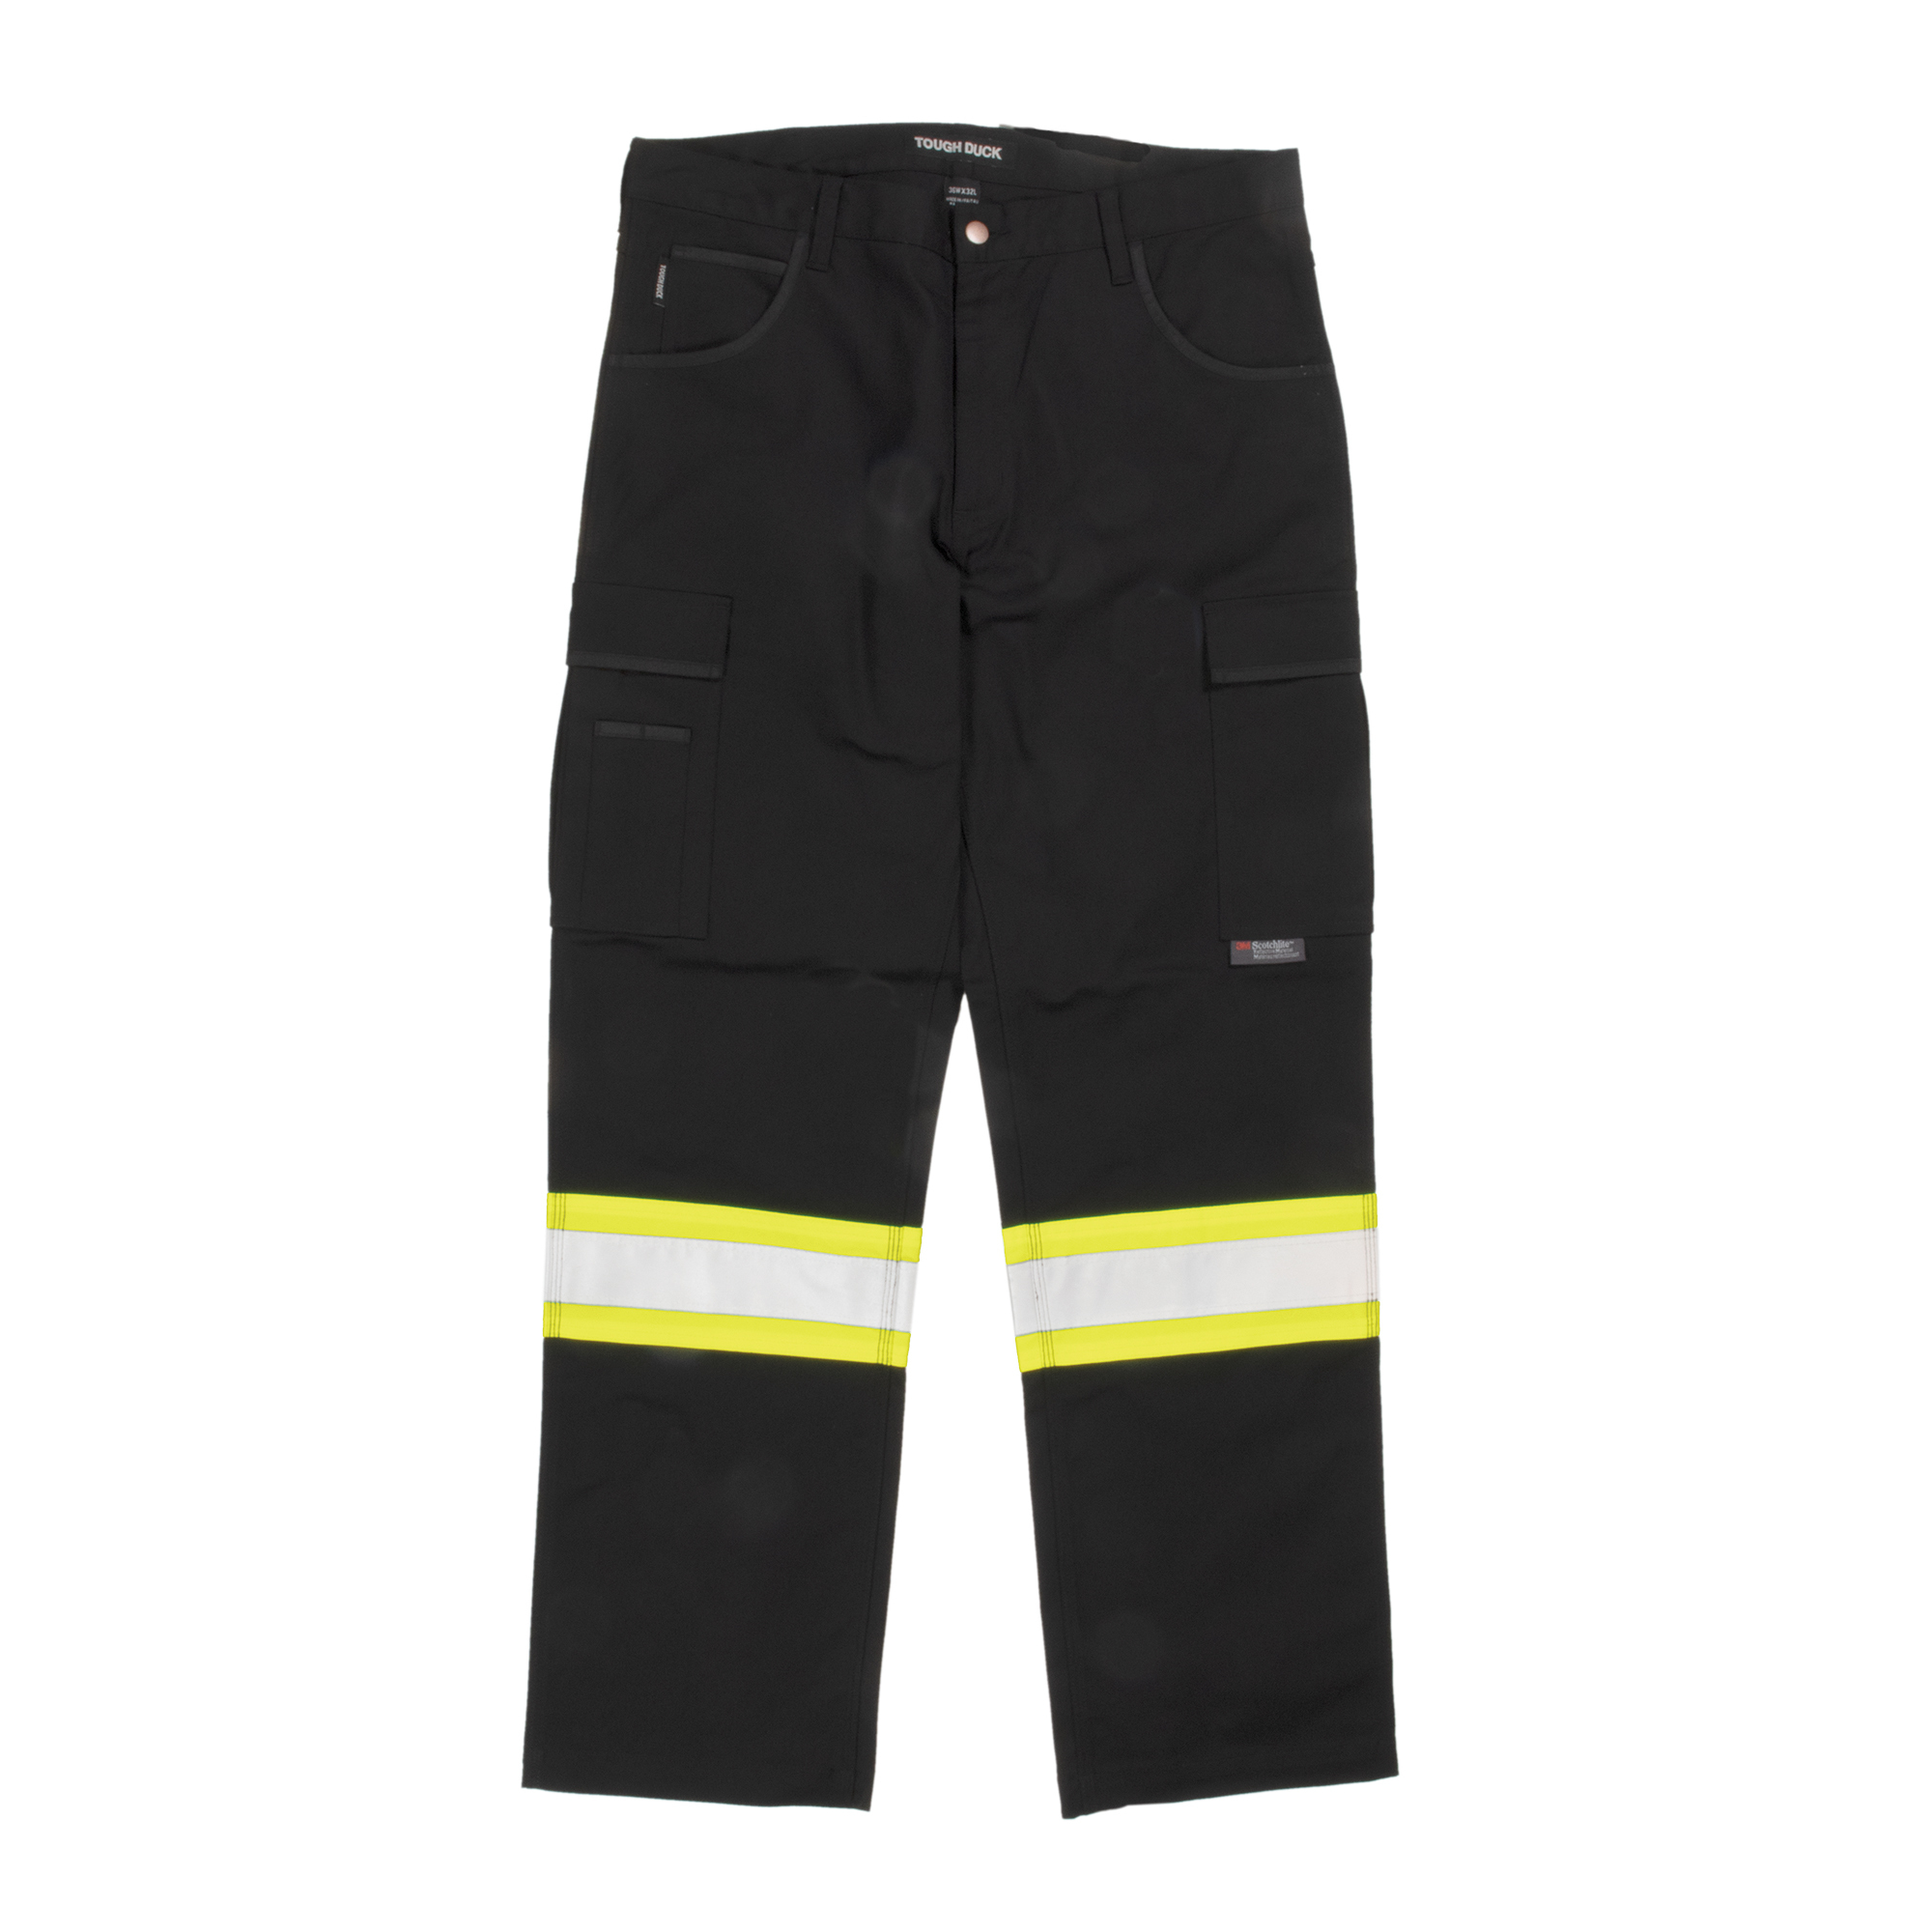 Tough Duck, Flex Twill Safety Cargo Pant, Waist 36 in, Inseam 30 in, Color Black, Model SP030